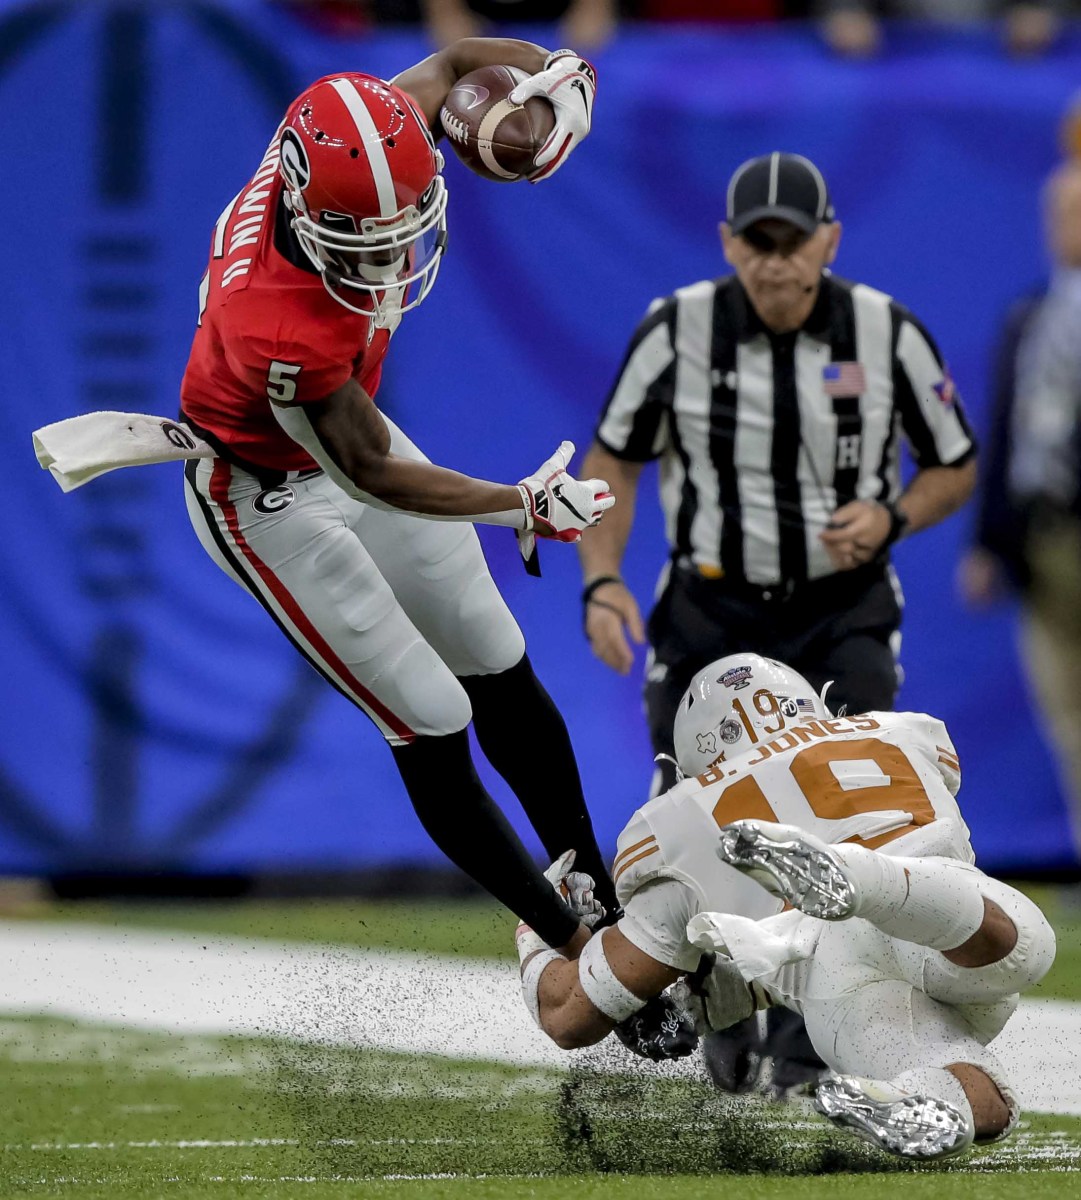 Jan 1, 2019; New Orleans, LA, USA; Georgia Bulldogs wide receiver Terry Godwin (5) is tackled by Texas Longhorns defensive back Brandon Jones (19) during the first quarter in the 2019 Sugar Bowl at Mercedes-Benz Superdome. Mandatory Credit: Derick E. Hingle-USA TODAY Sports